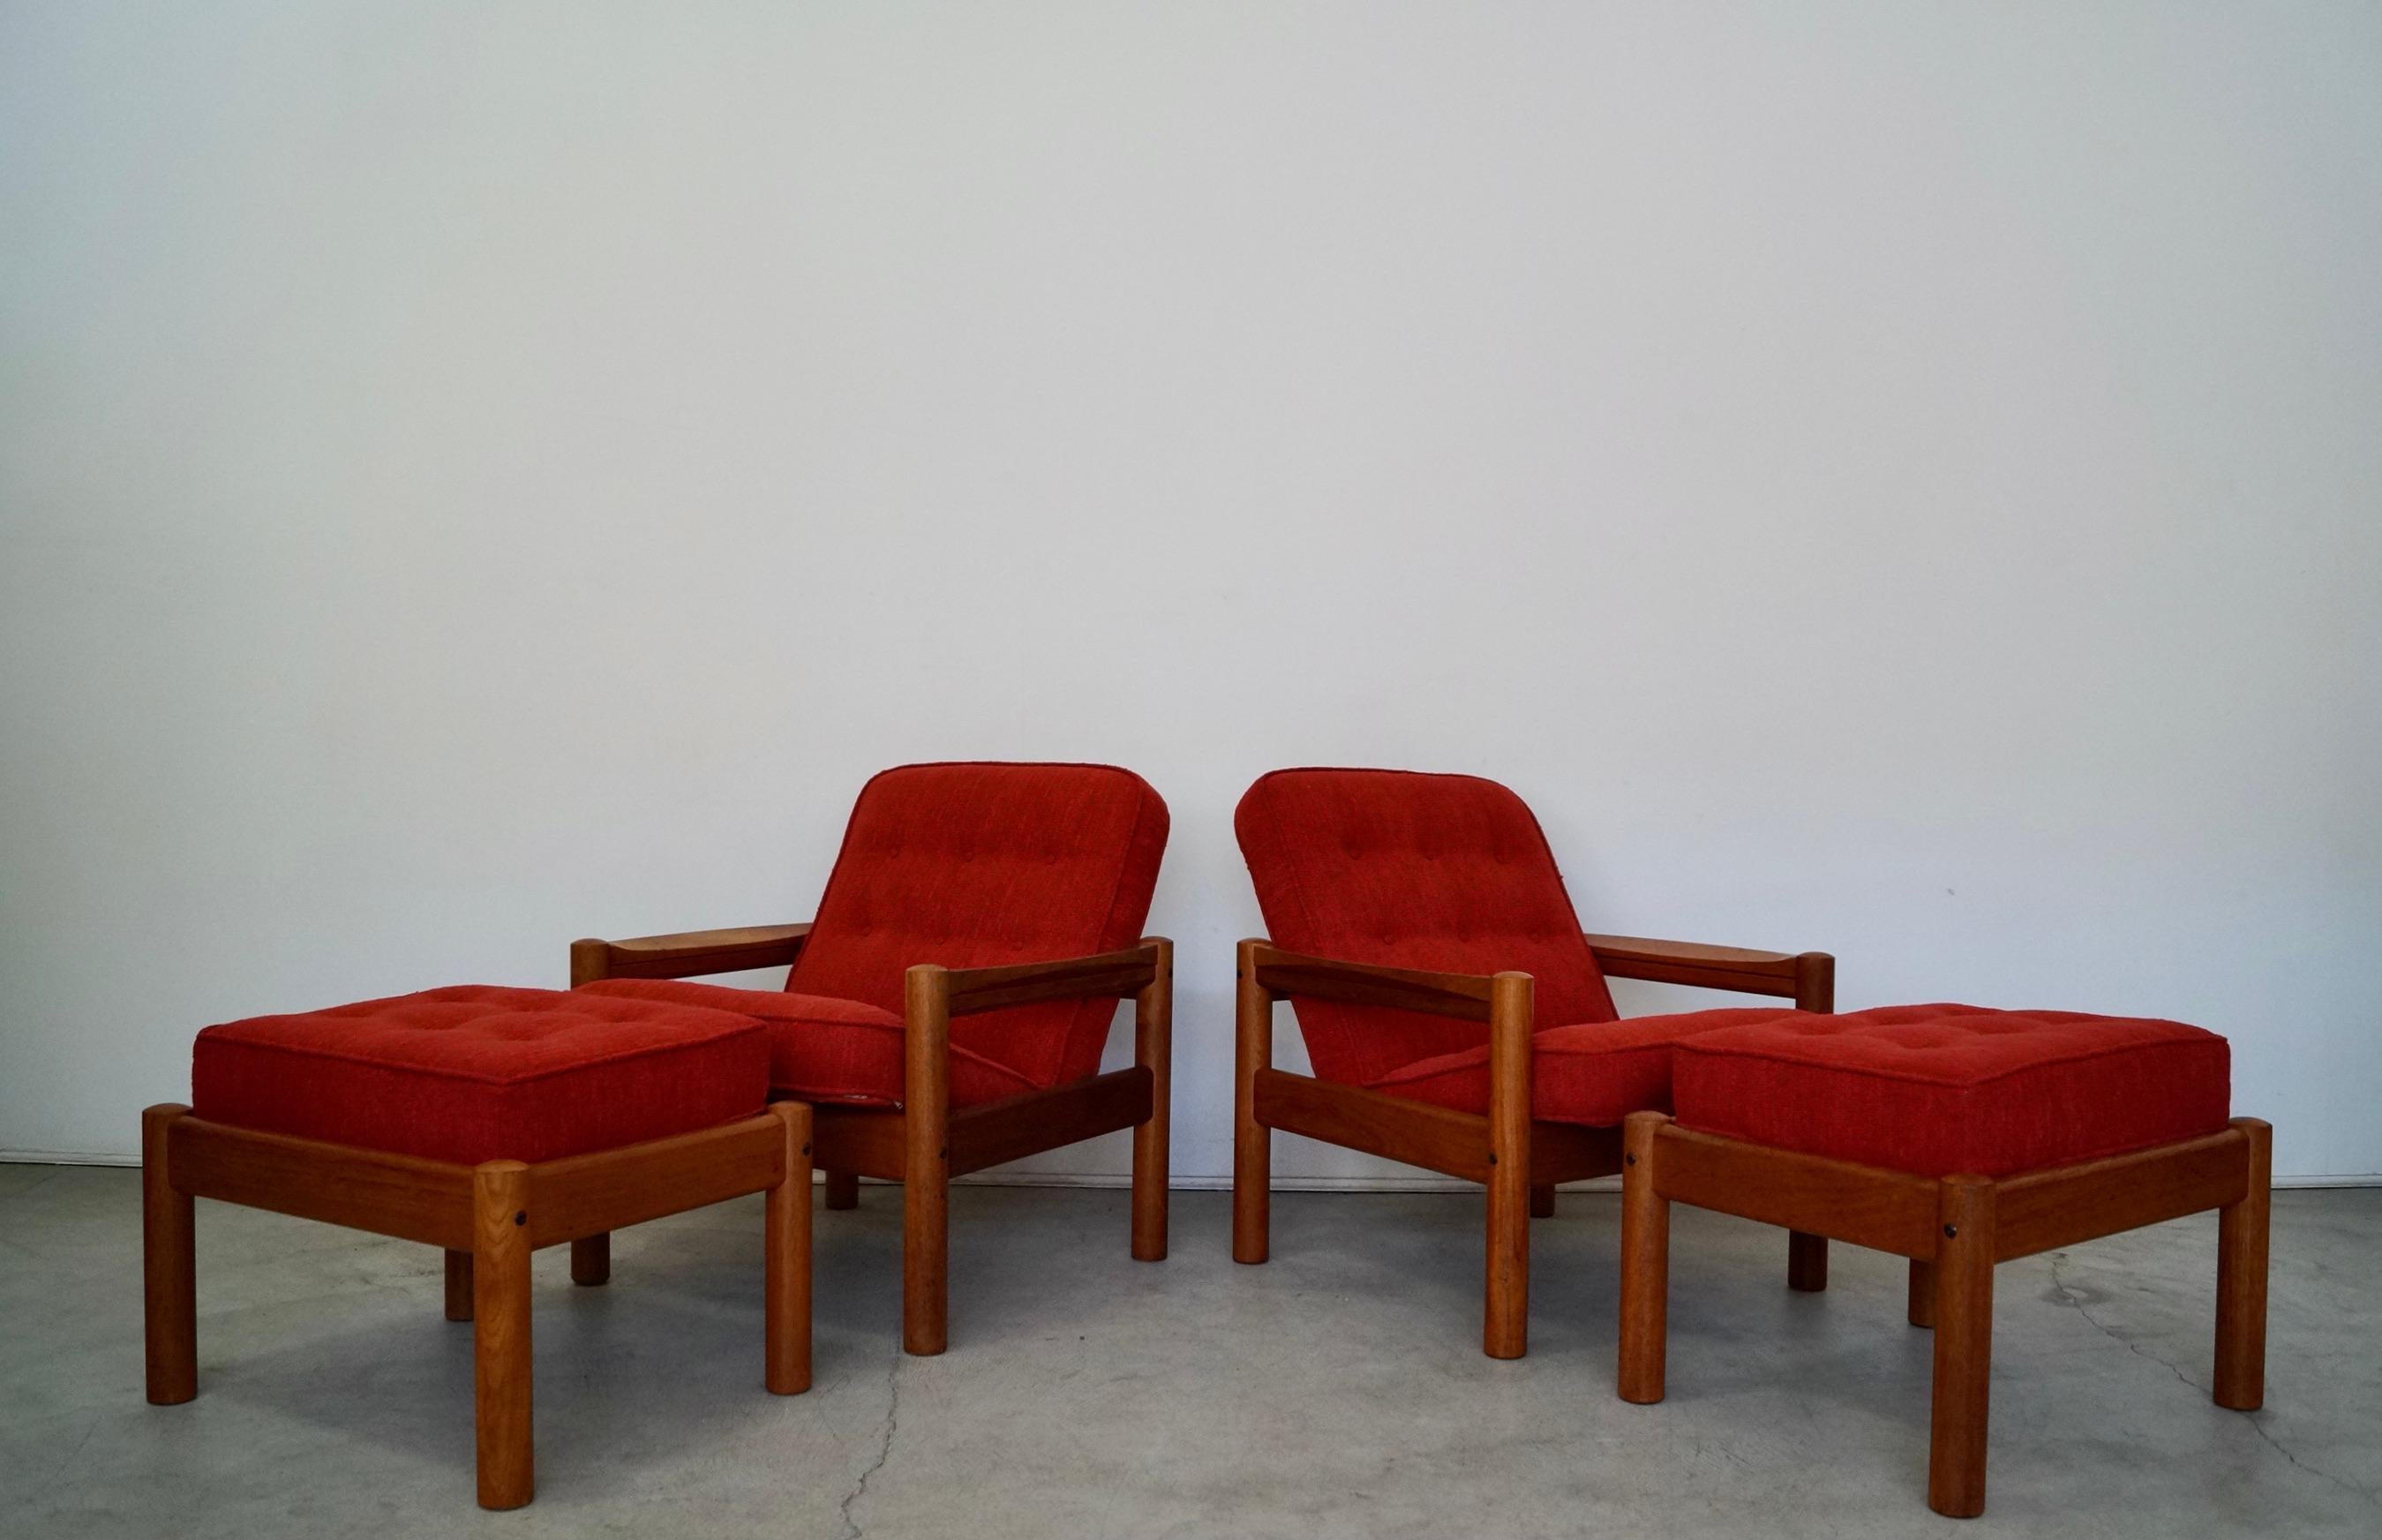 Mid-Century Modern 1970's Danish Modern Teak Lounge Chairs by Domino Mobler - a Pair For Sale